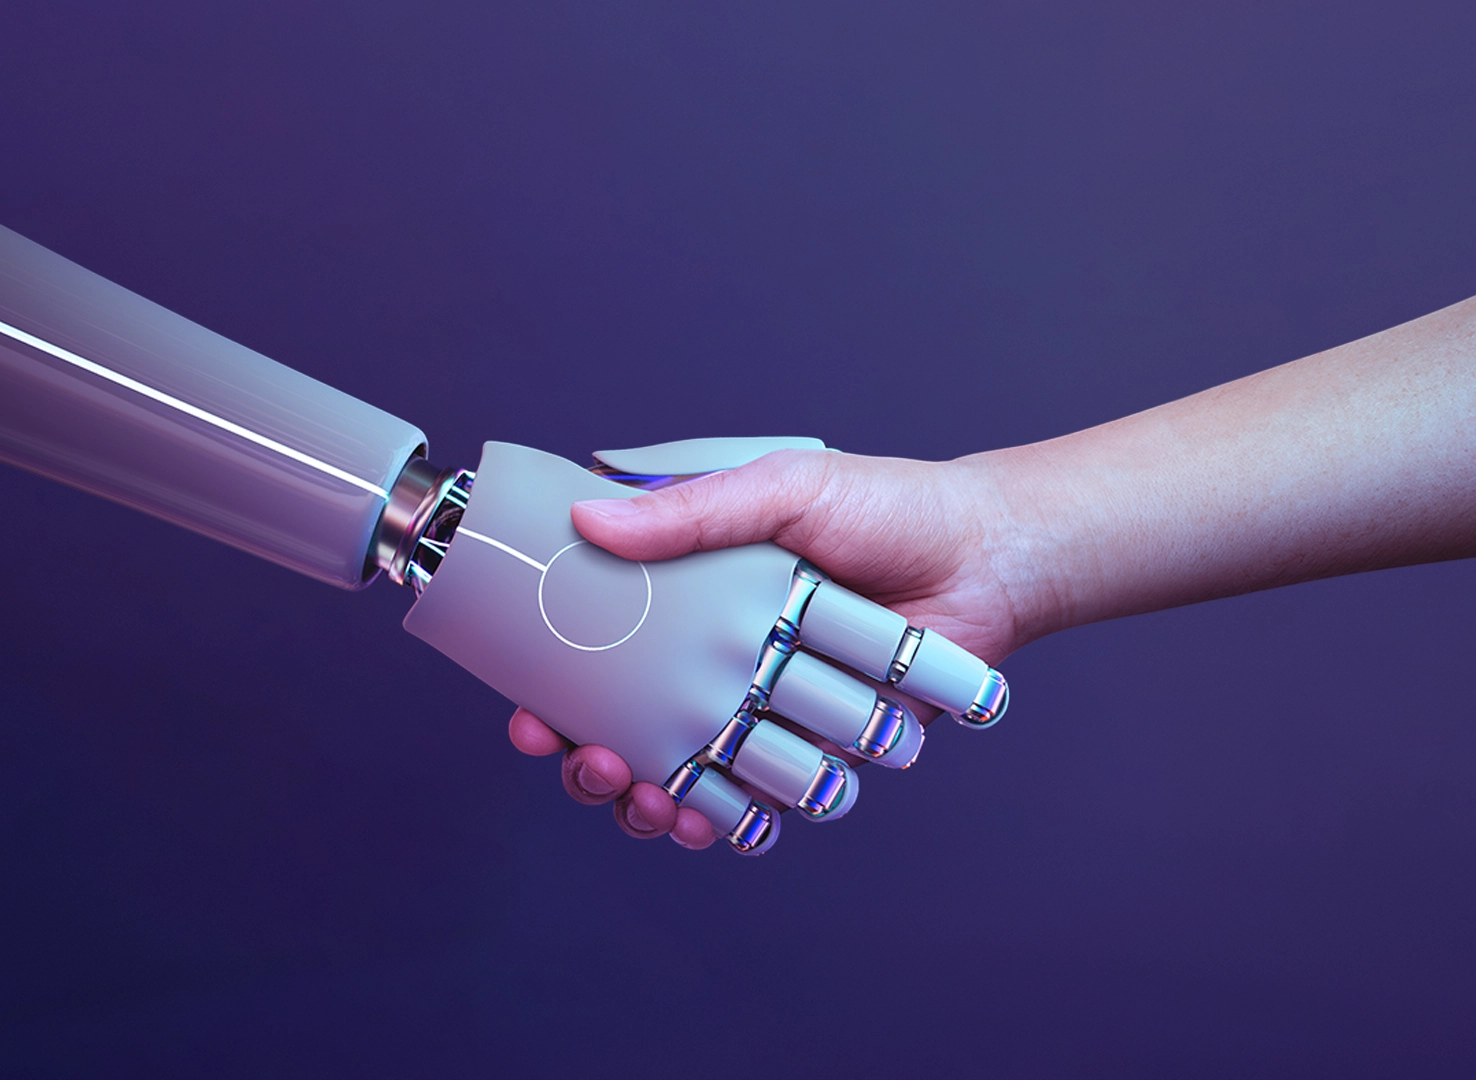 How Artificial Intelligence Will Change the Future?